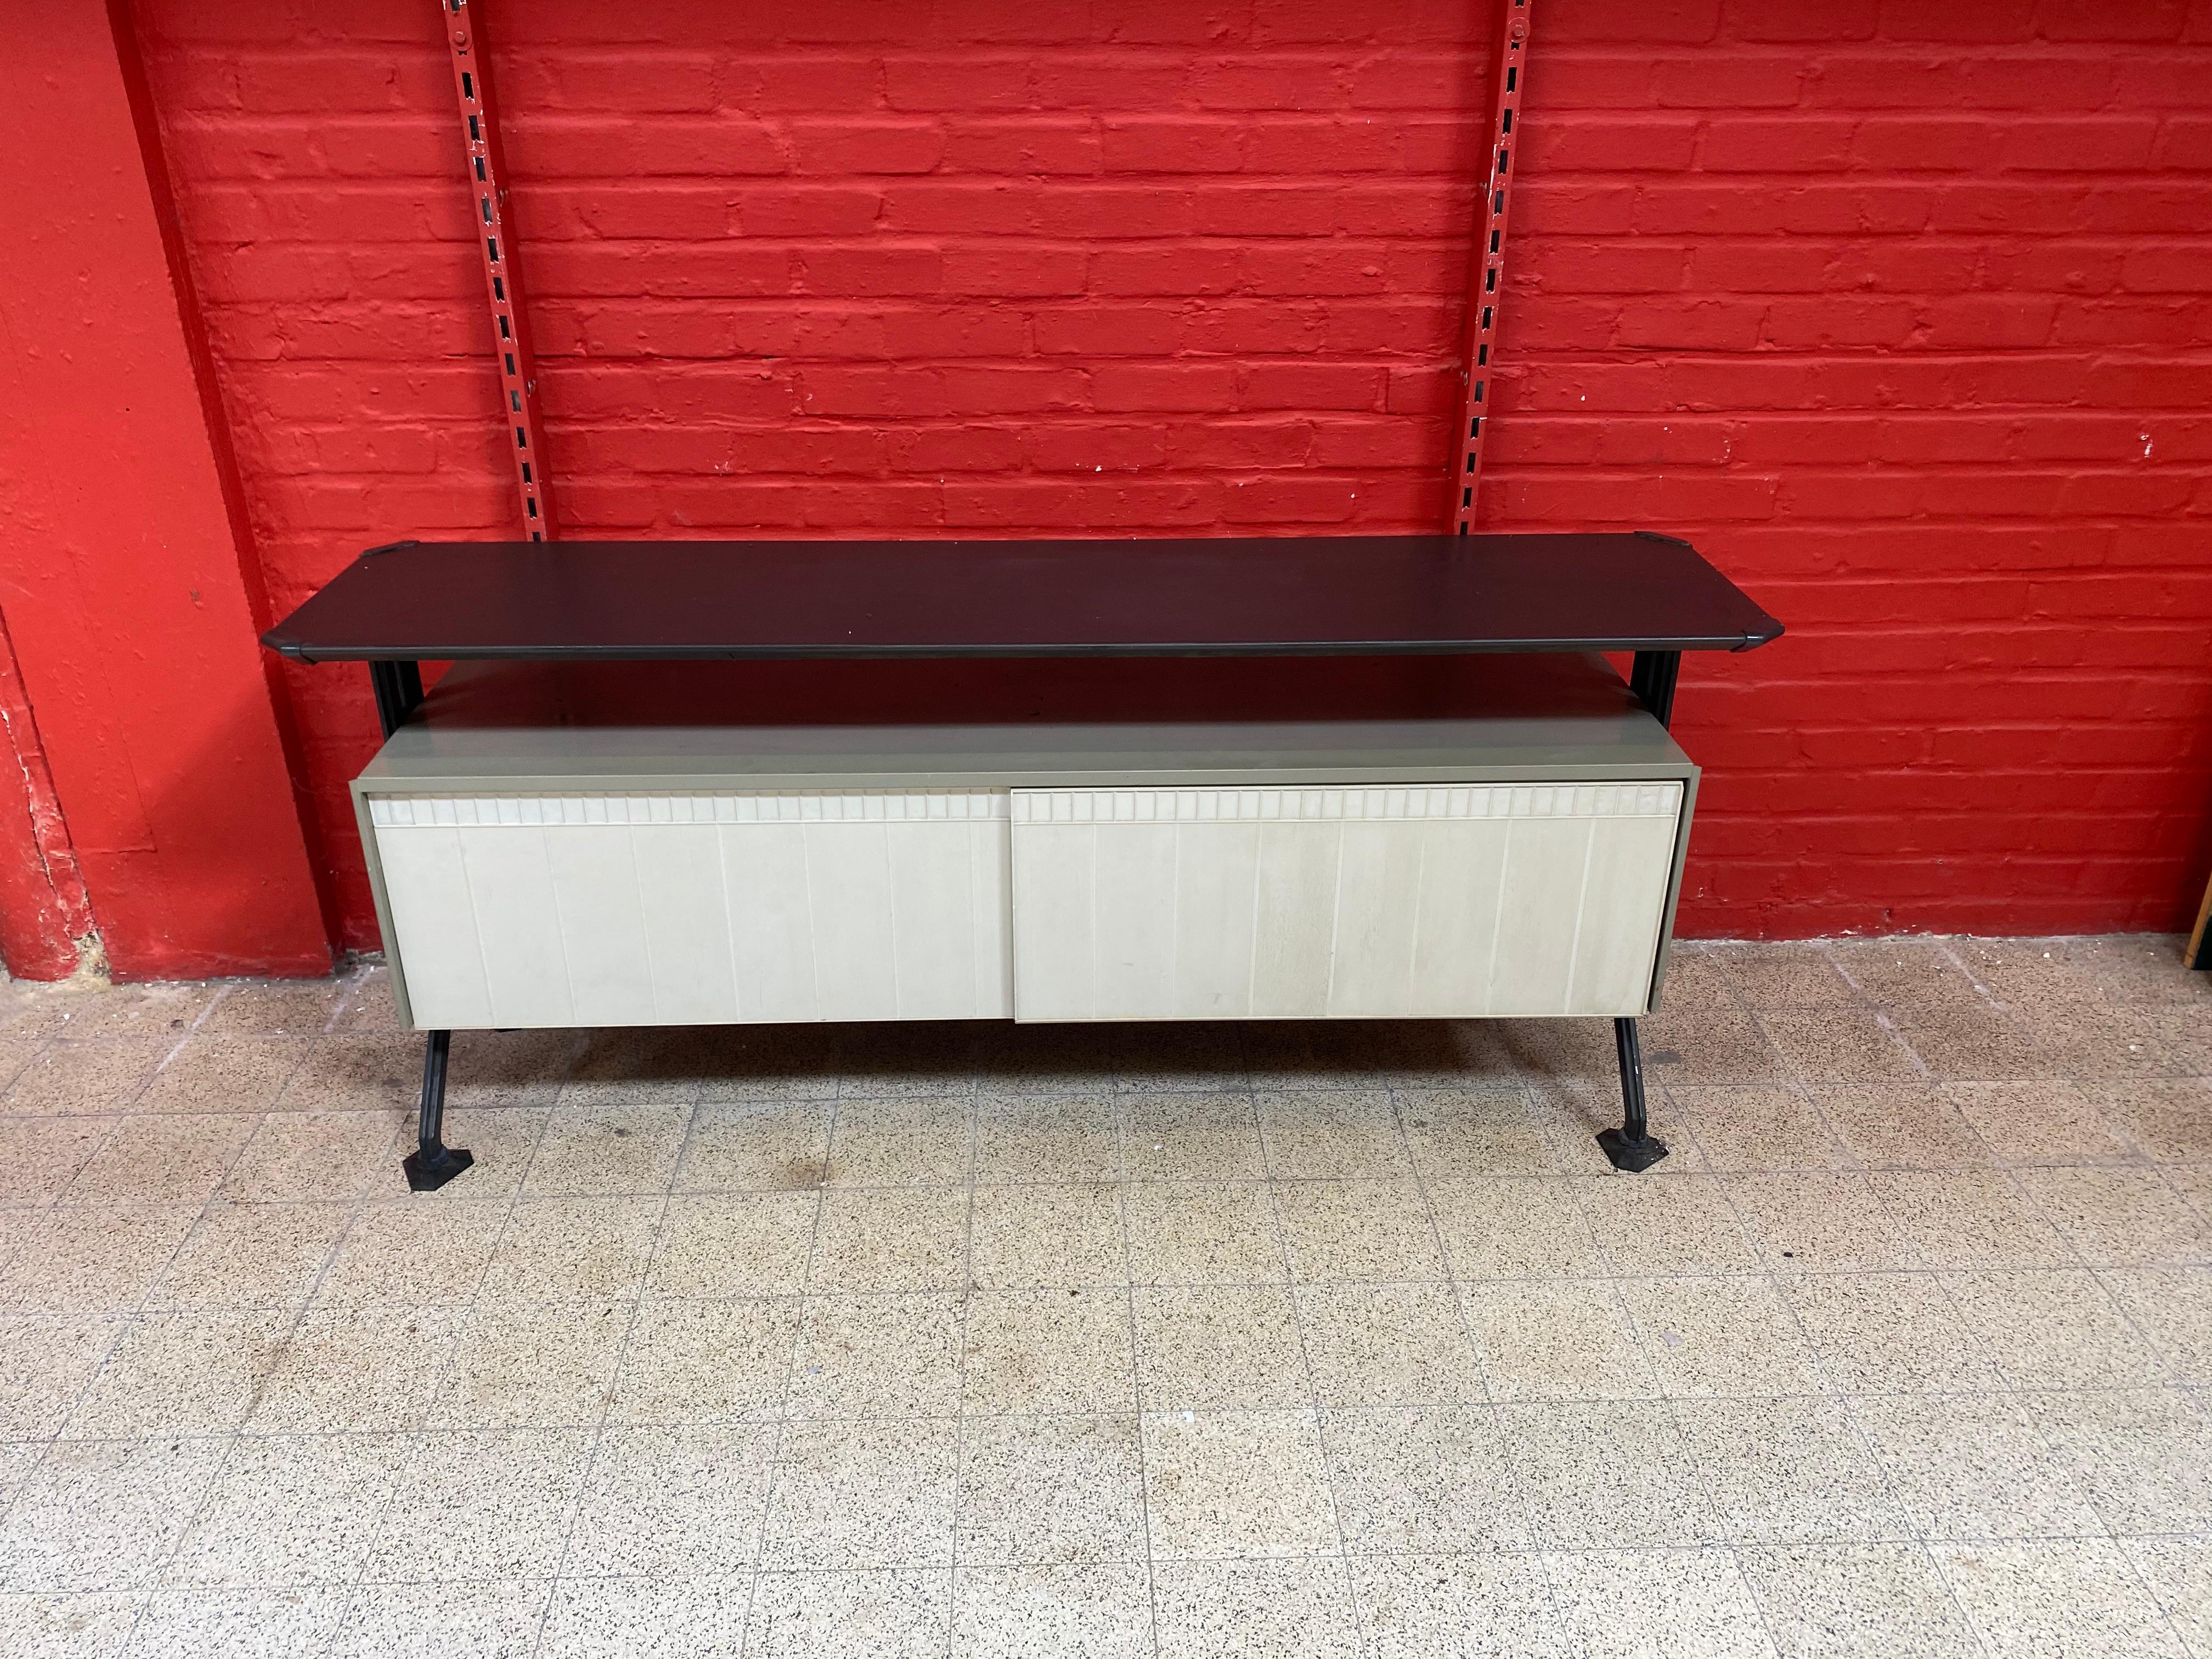 Rare desk set by BBPR for Olivetti Synthesis, including a desk, a storage unit, an office chair, a lamp and a wastepaper basket
storage unit: 76 x 180 x 42 cm.
 